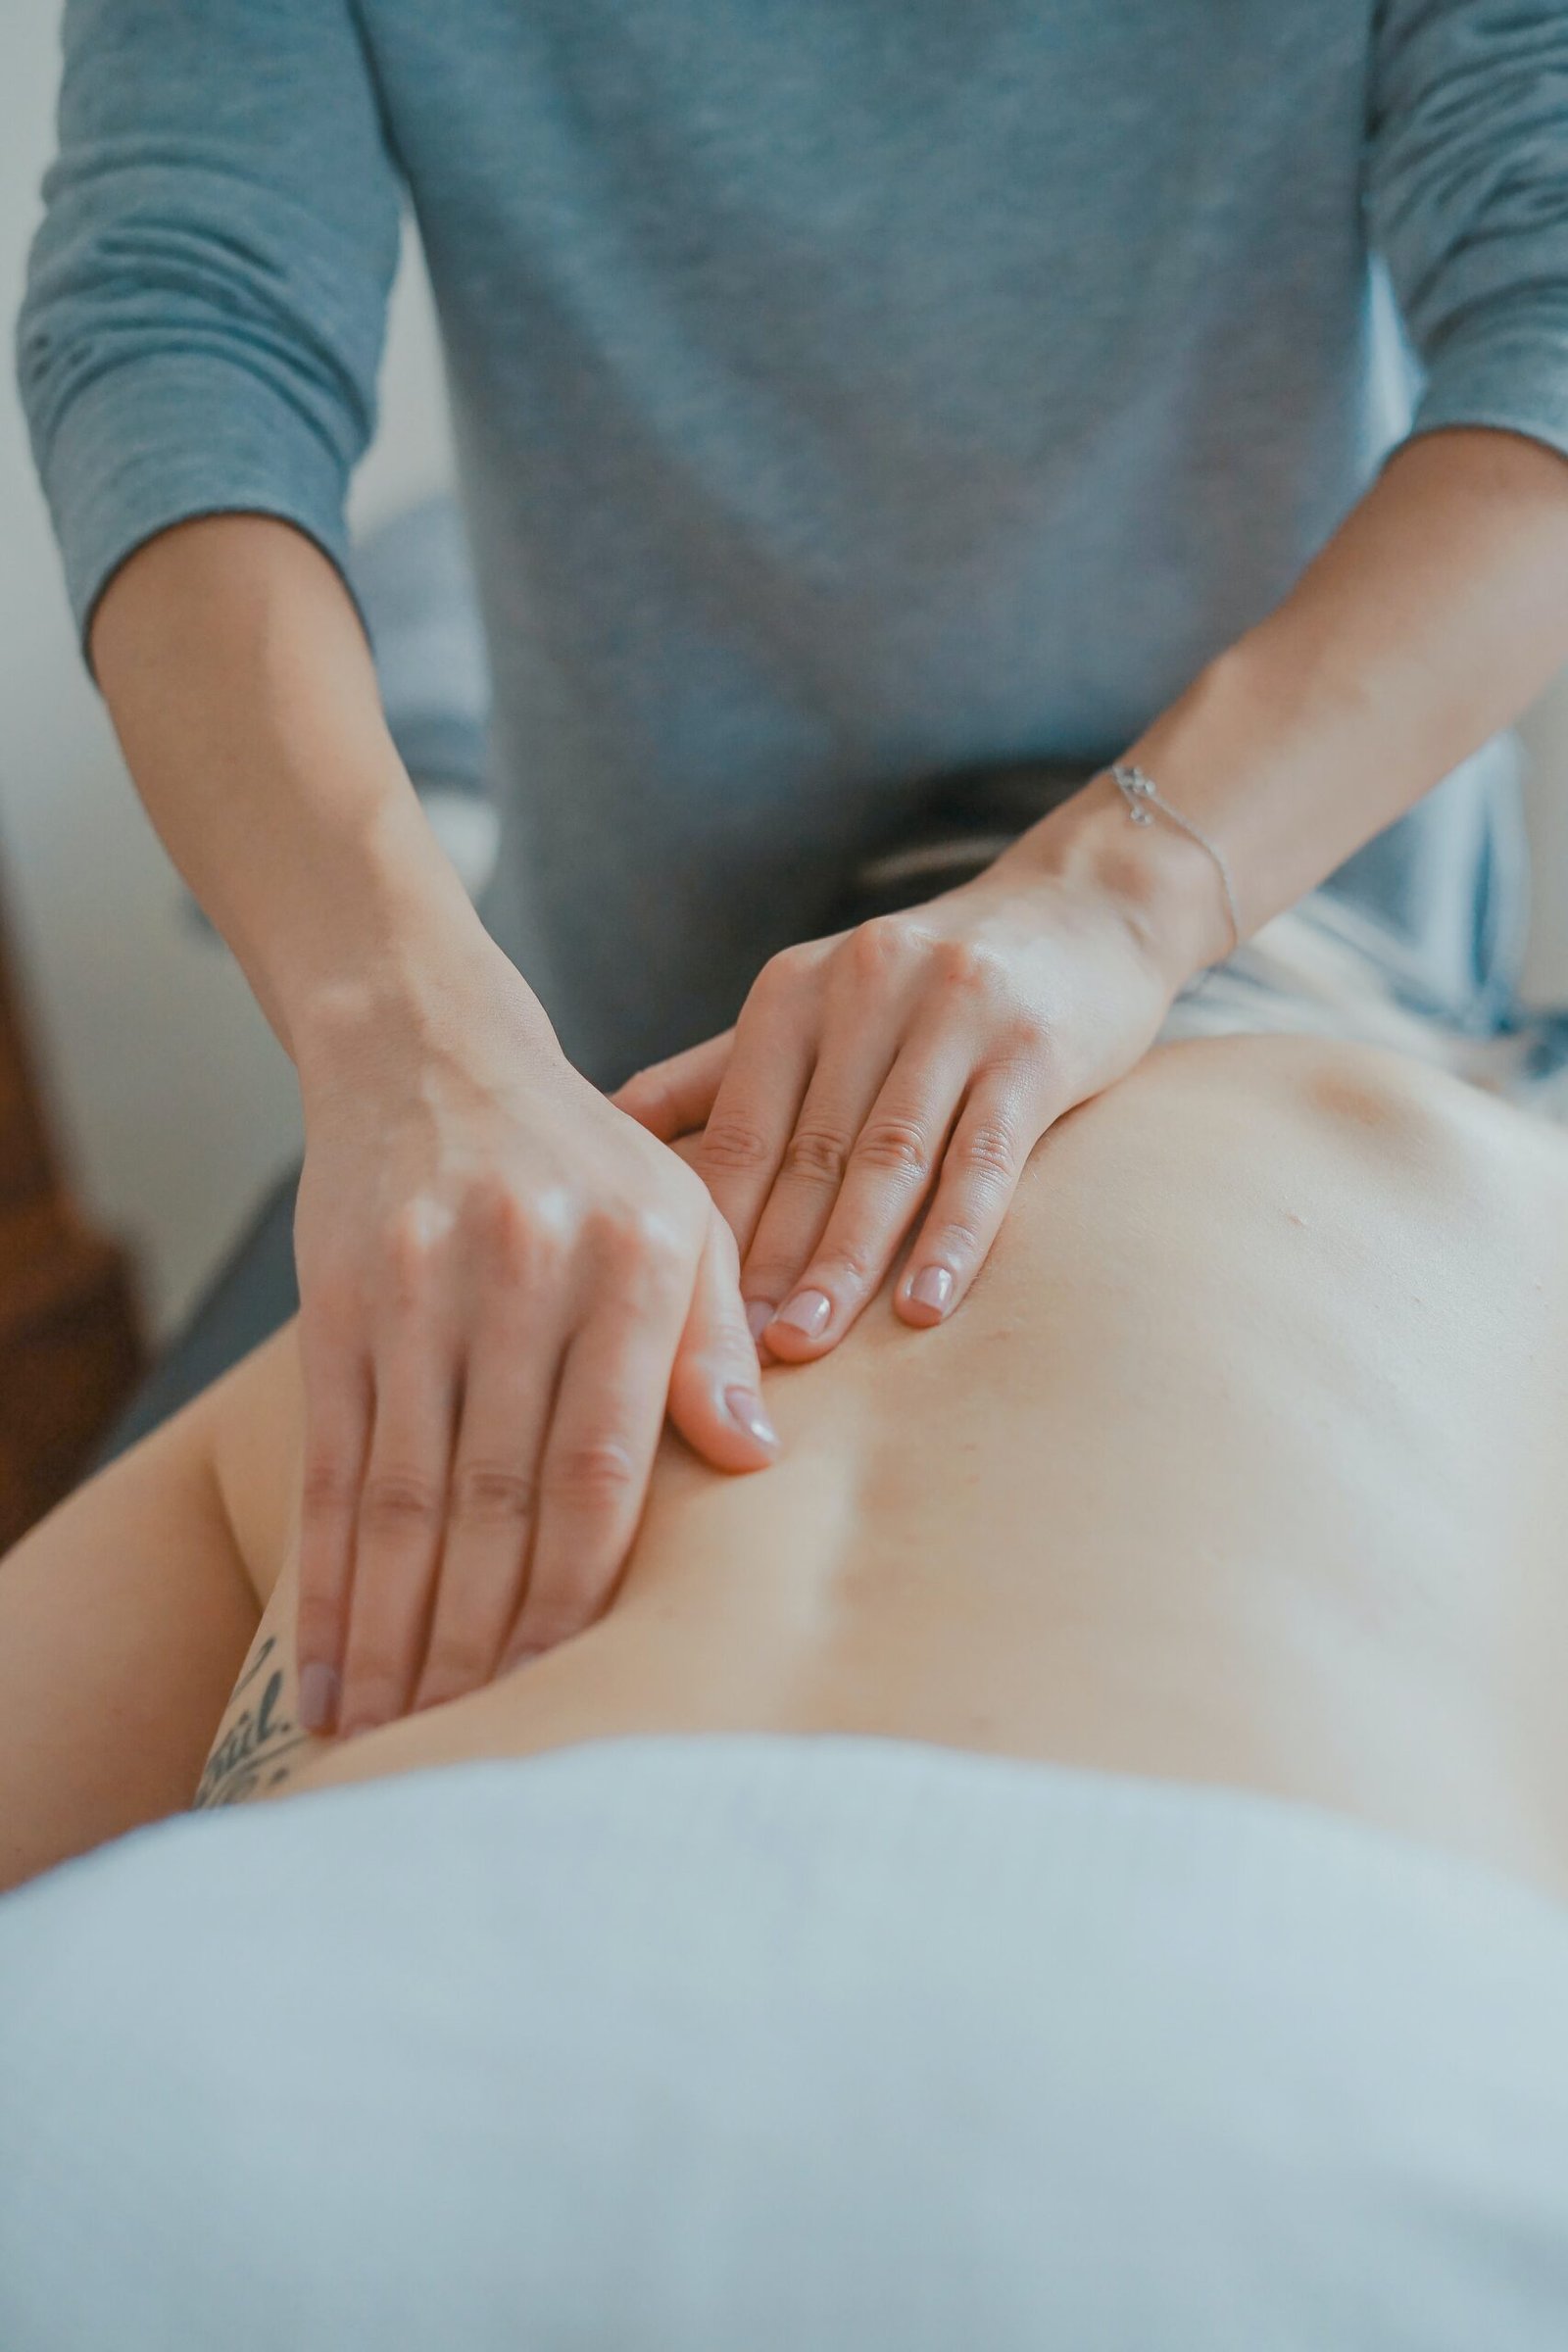 Melt Away Tension with Expert Massage Therapists